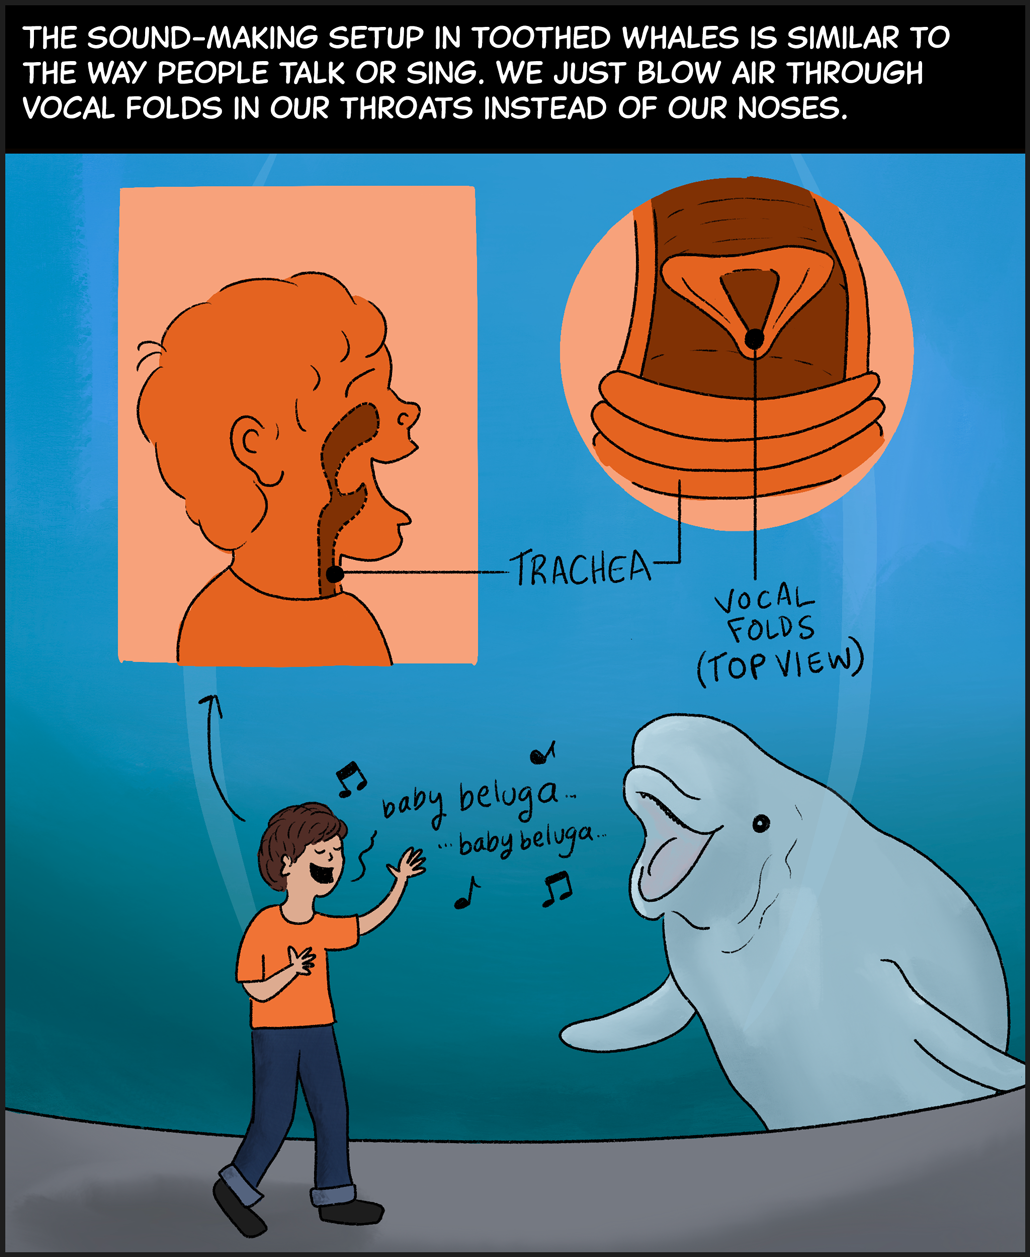 Text (above image): The sound-making setup in toothed whales is similar to the way people talk or sing. We just blow air through vocal folds in our throats instead of our noses. Image: A child in an orange shirt and jeans stands next to the glass at an aquarium with a beluga whale on the other side. The child is singing “Baby beluga, baby beluga…” A diagram above the child shows how inside the child’s throat, vocal folds are vibrating to produce the song.